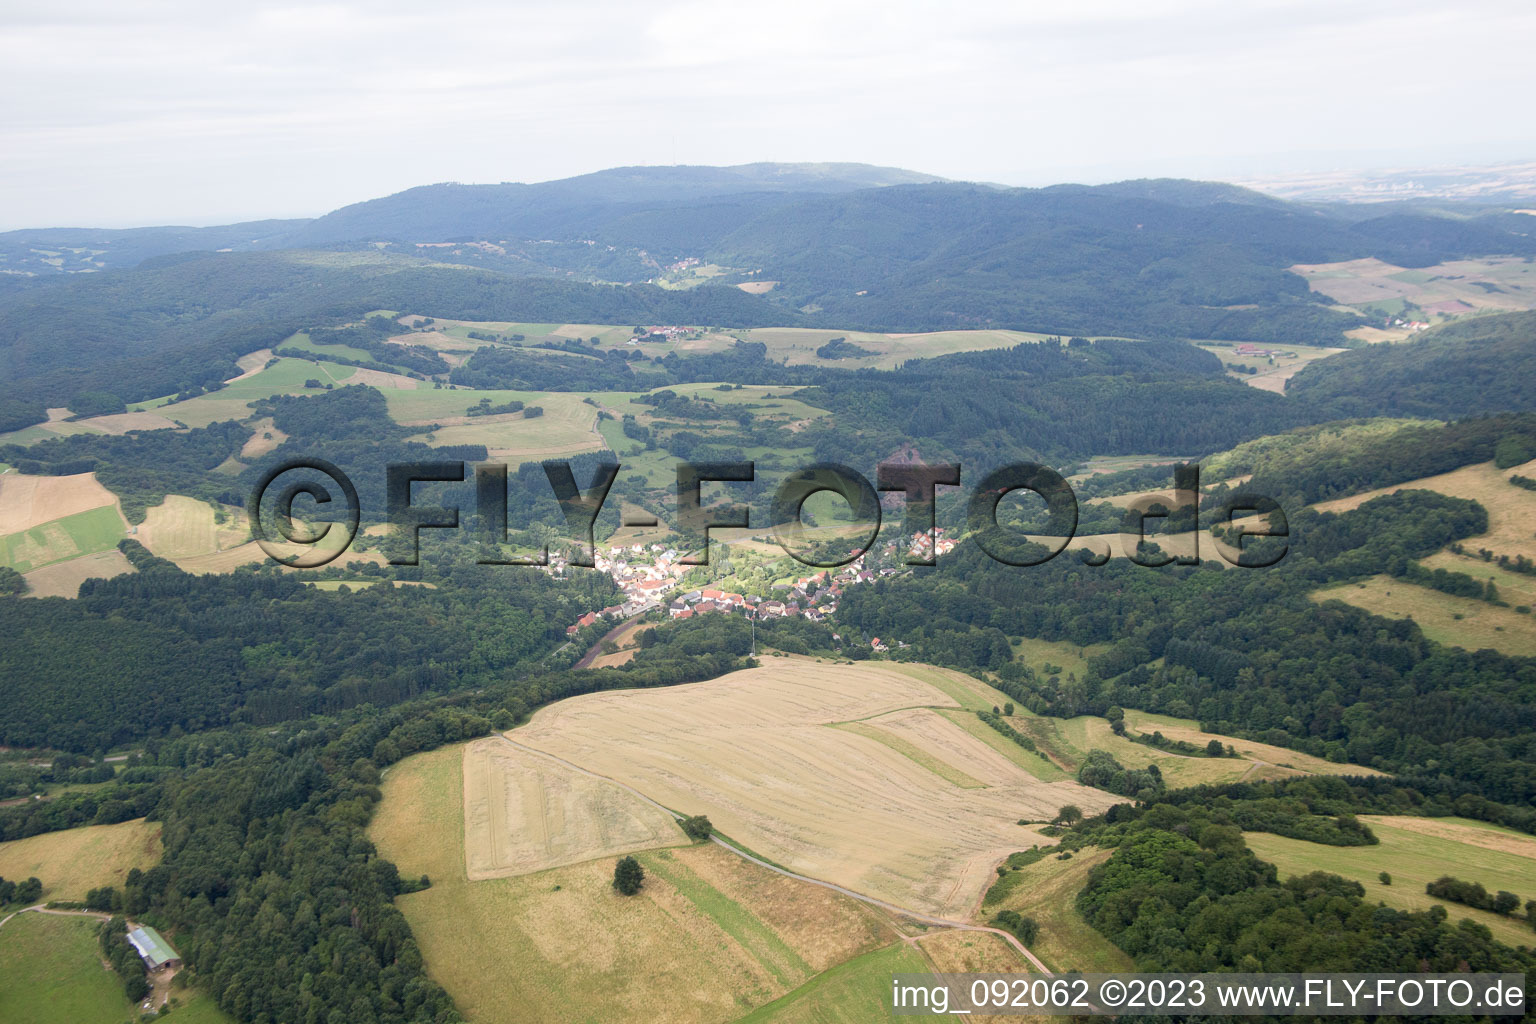 Aerial view of Schweisweiler in the state Rhineland-Palatinate, Germany